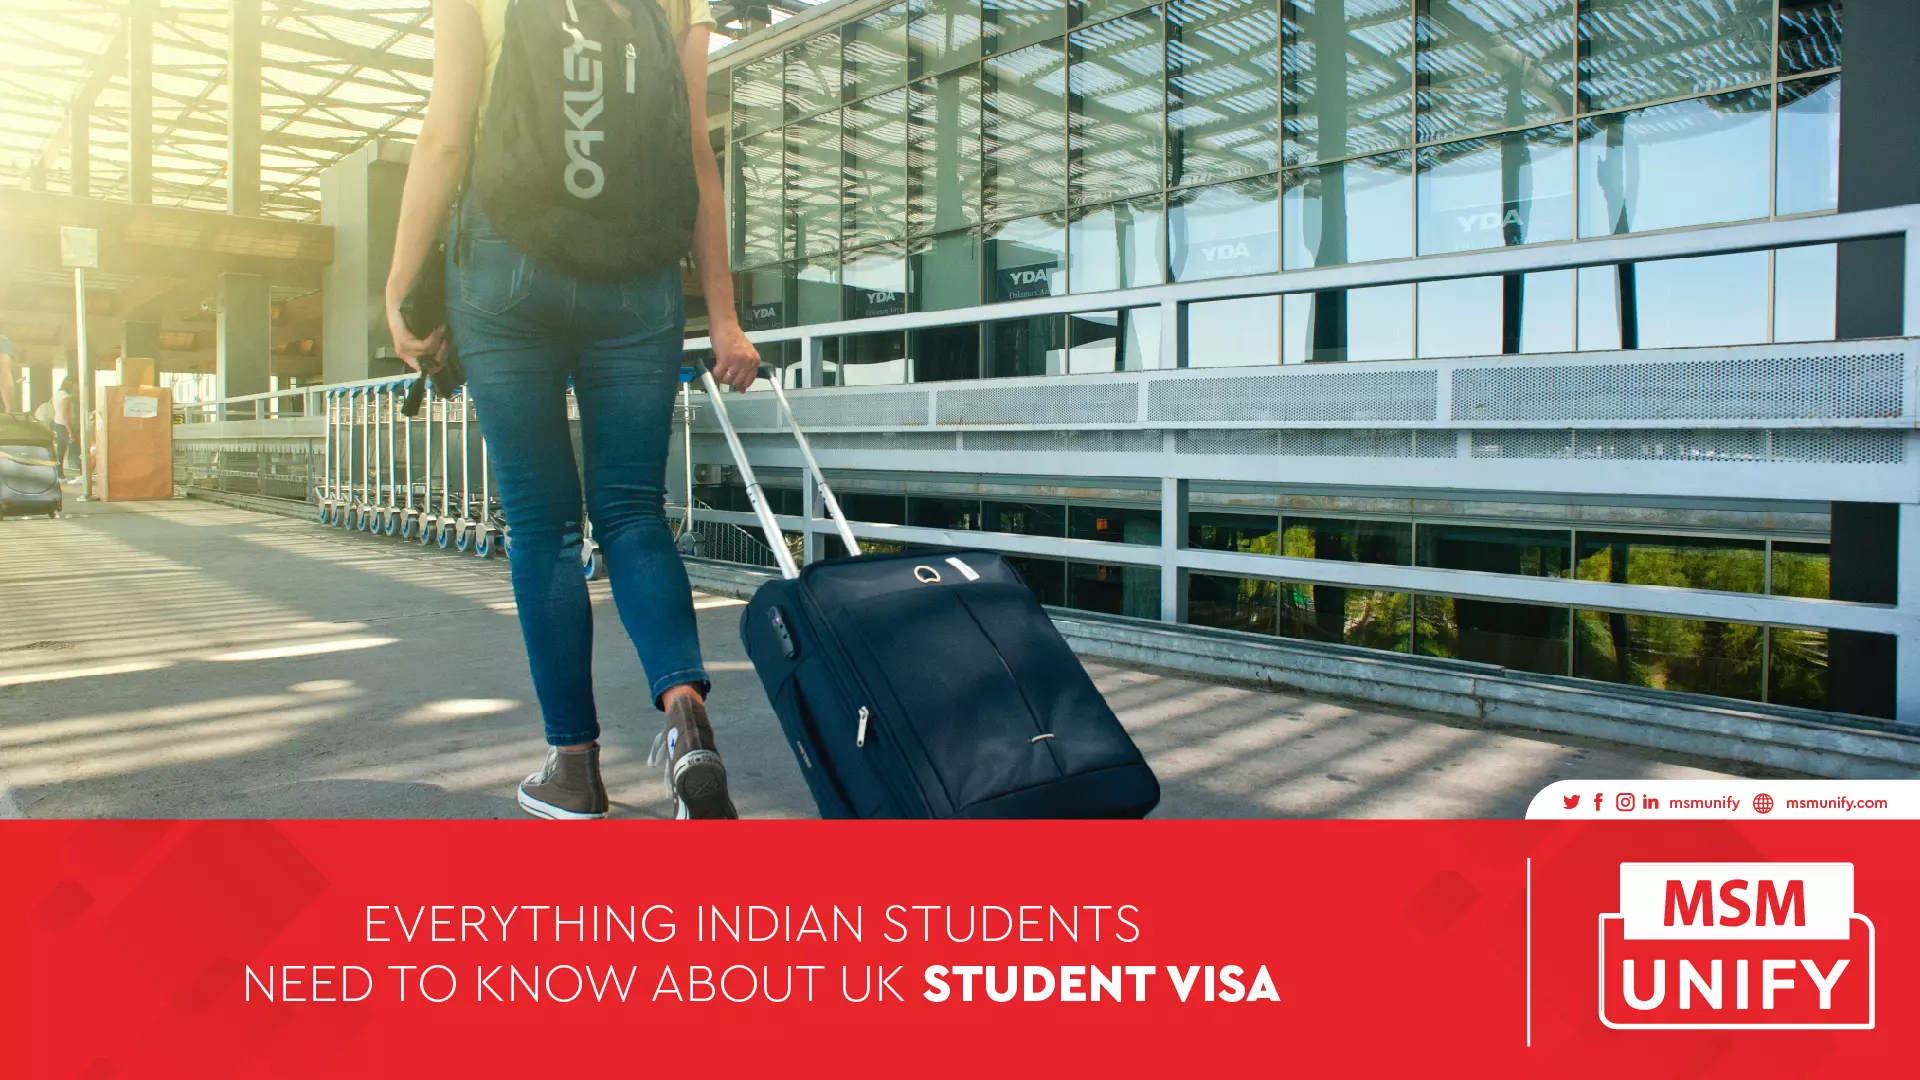 120922 MSM Unify Everything Indian Students Need to Know About UK Student Visa 01